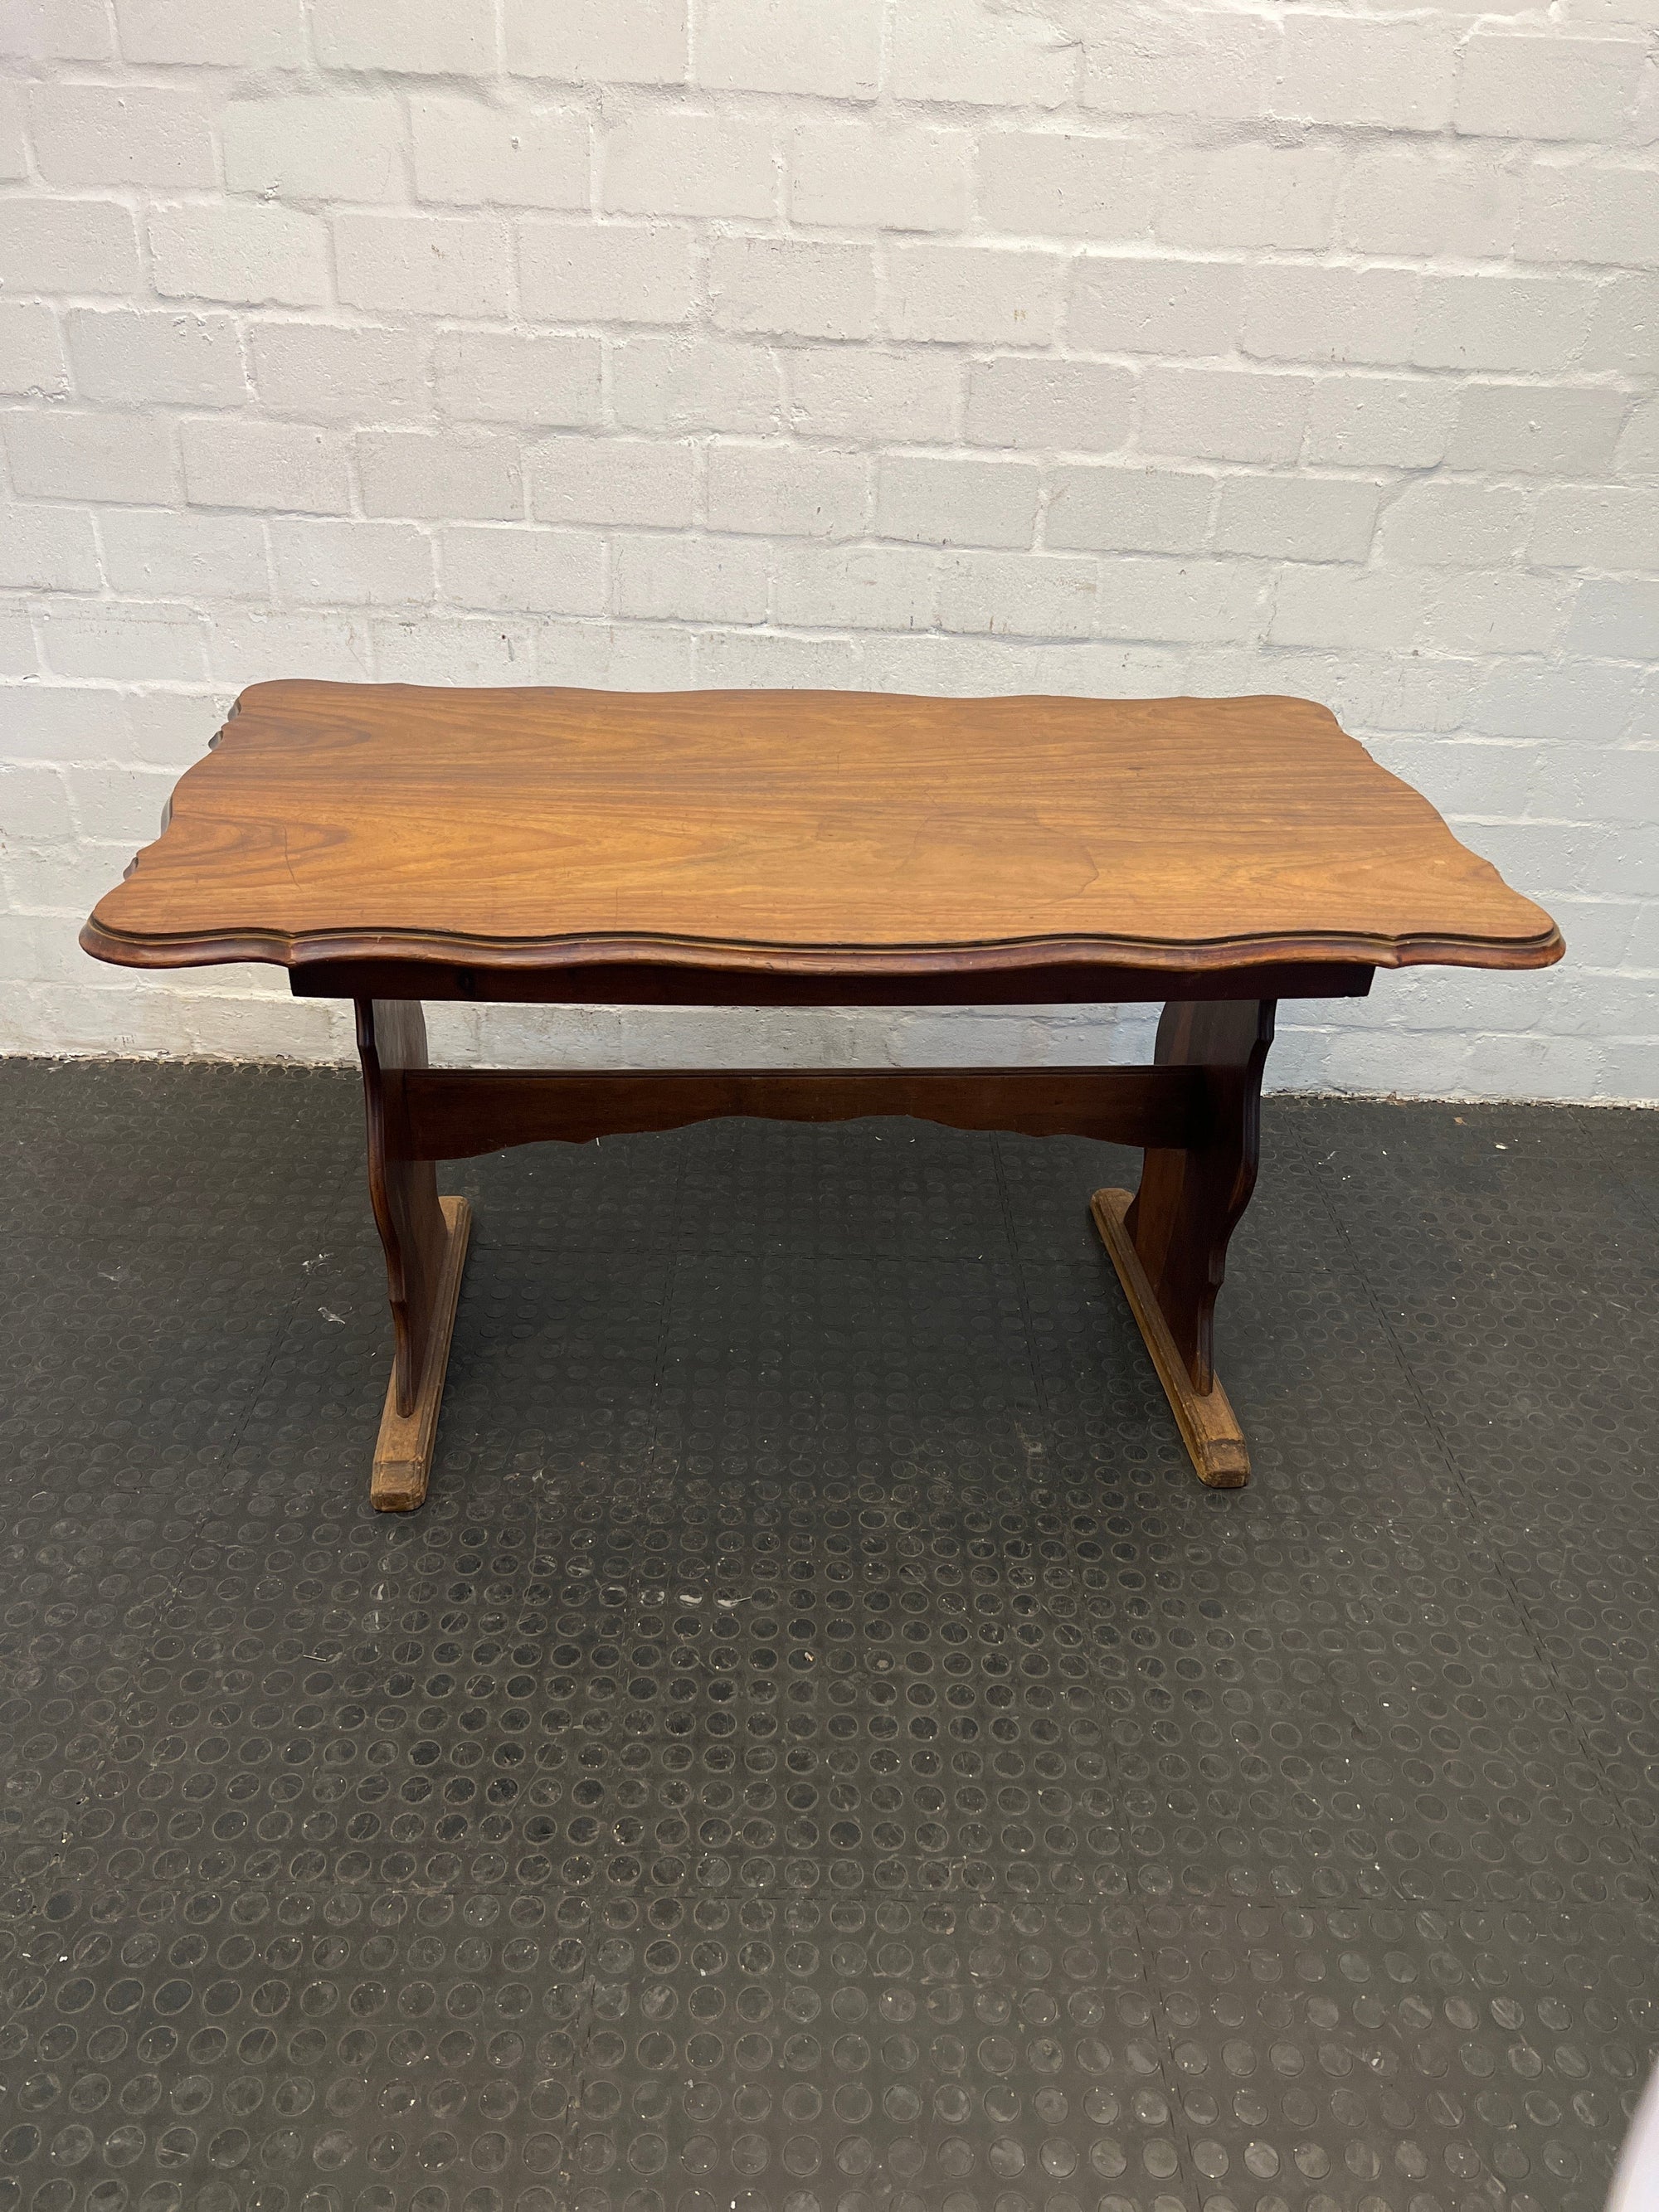 Wooden Four Seater Dining Table